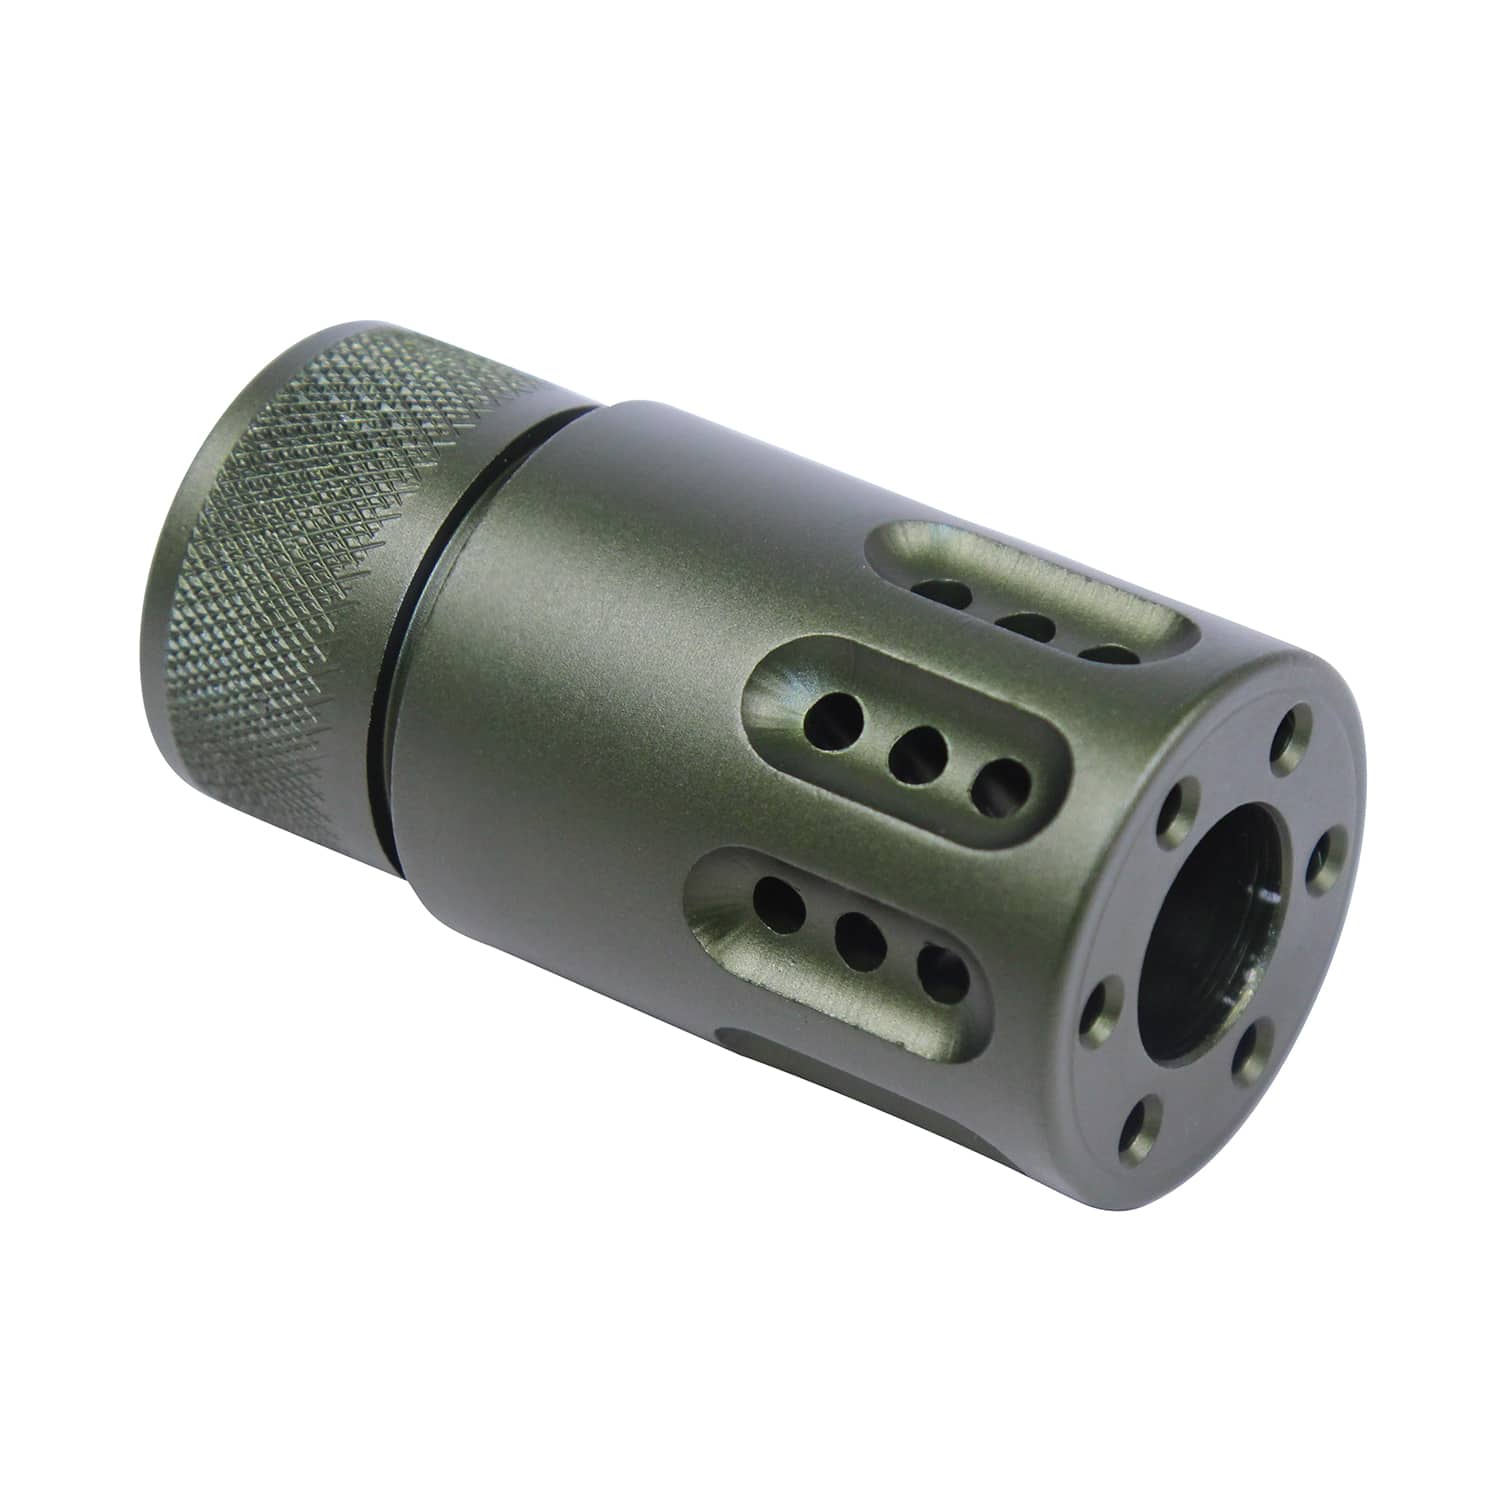 AR-15 9MM muzzle brake and barrel shroud in olive green anodized finish